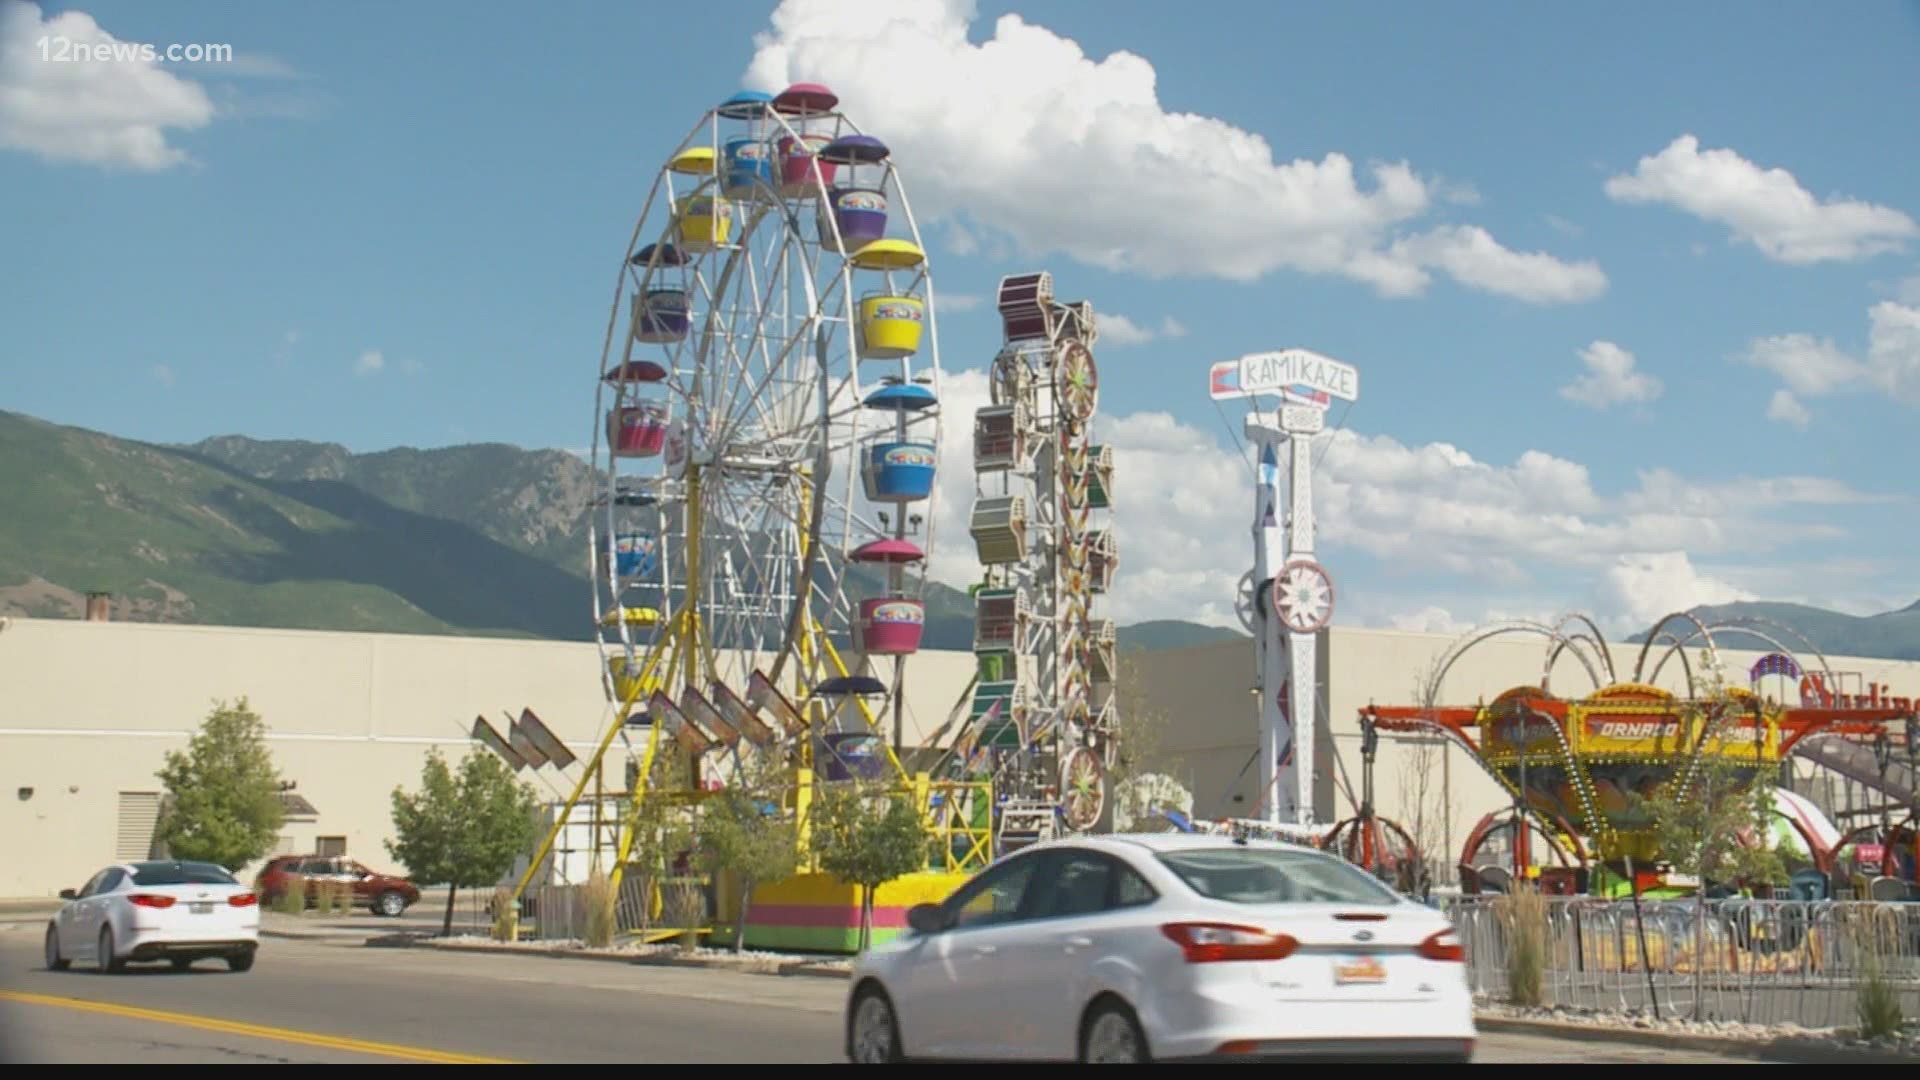 A traveling carnival owner from the Valley is facing felony charges of human trafficking in Utah. The man was arrested for allegedly holding workers hostage.